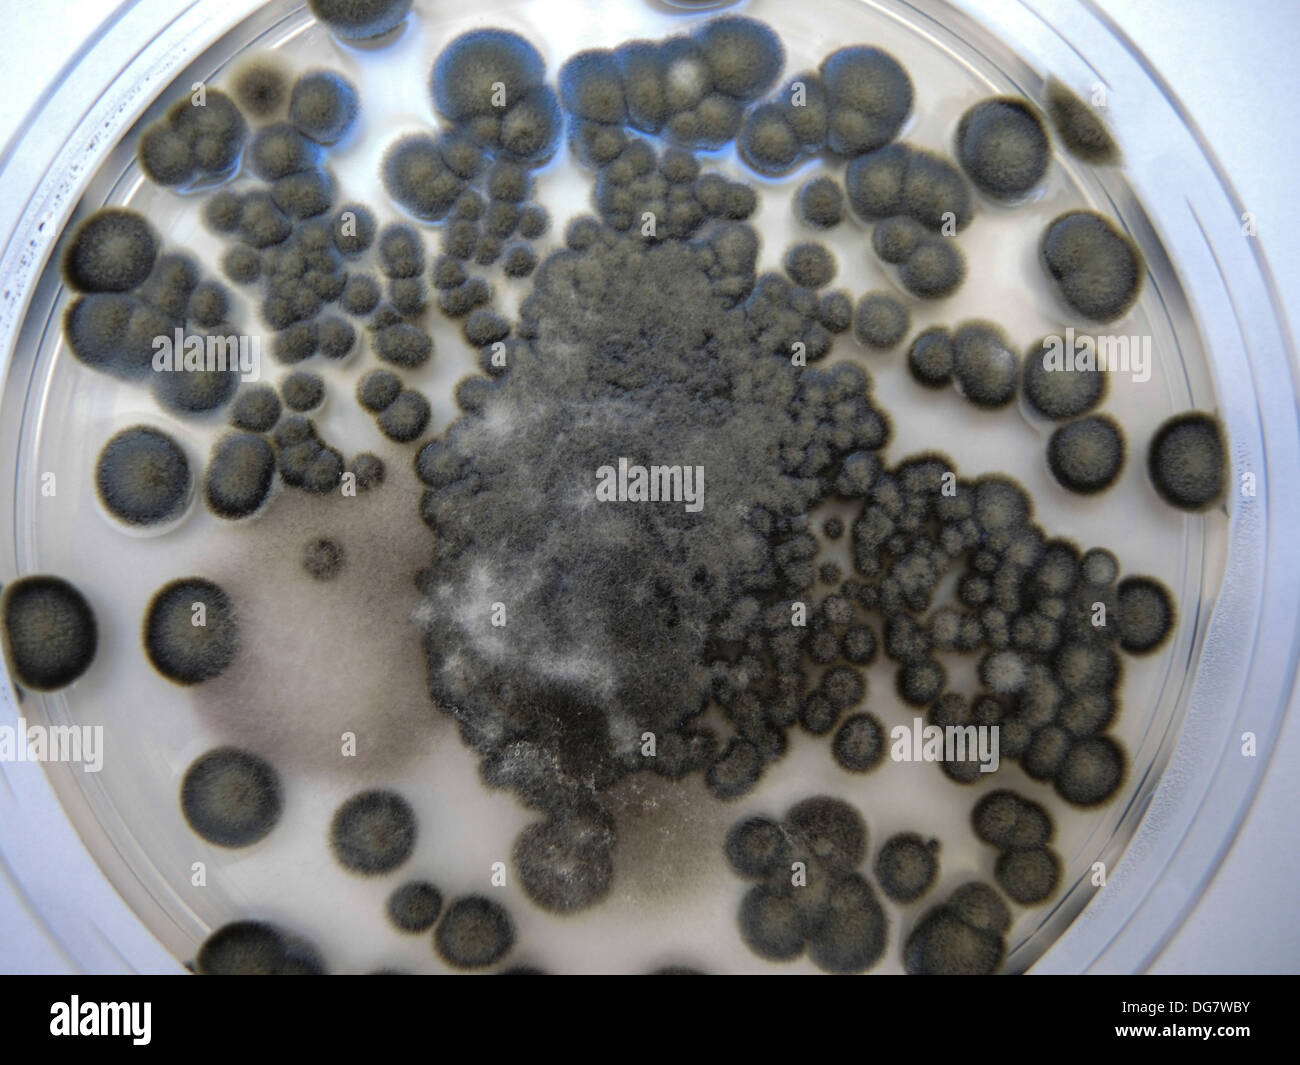 Cladosporium cladosporioides mold in a petri dish This is a fungal plant pathogen that affects wheat Stock Photo